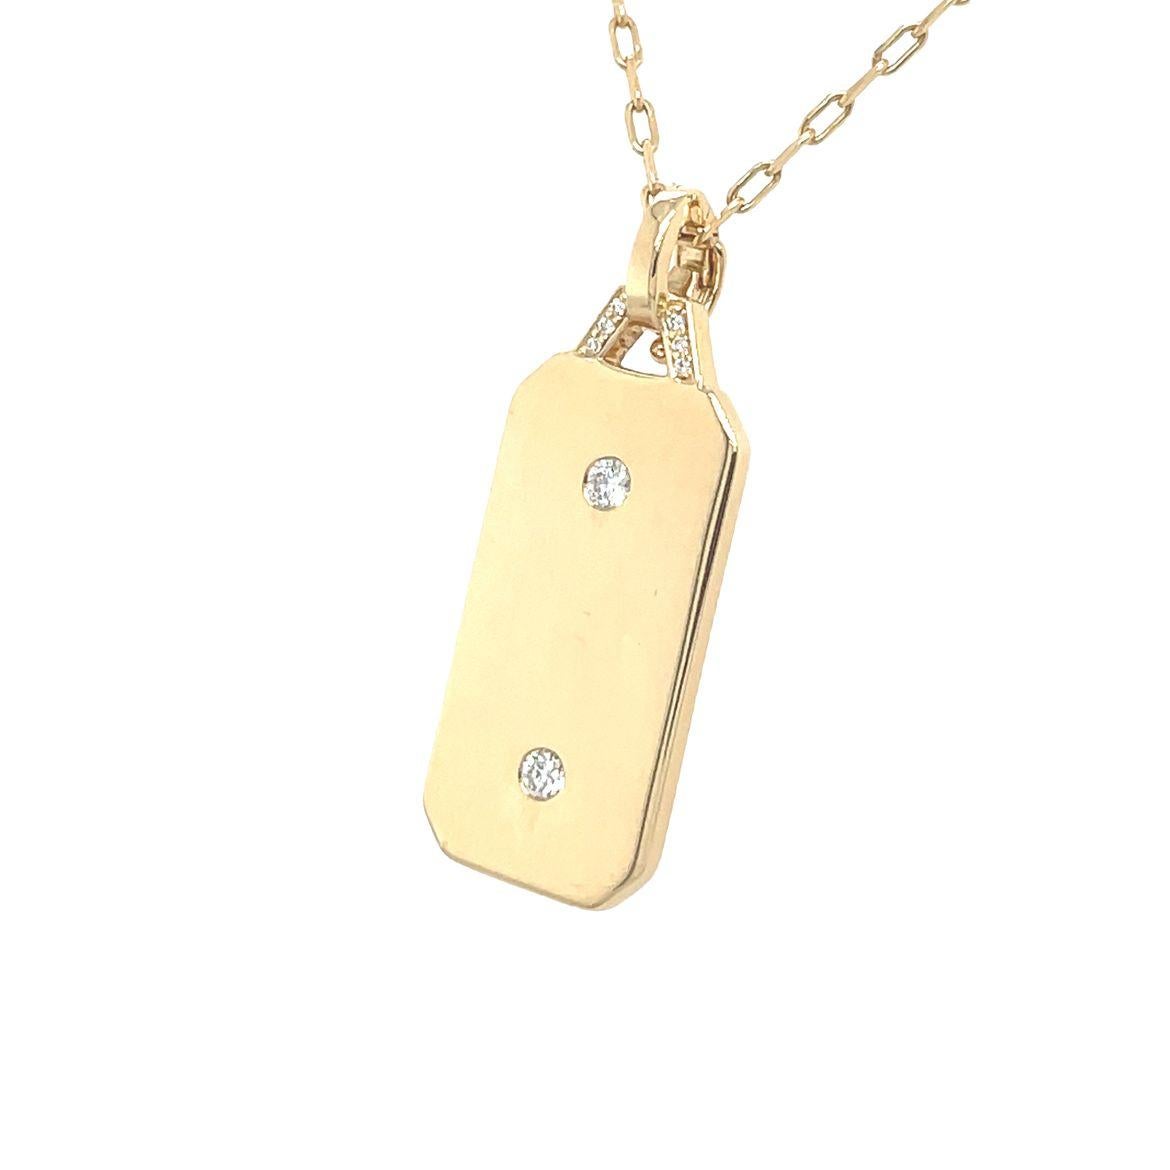 Walter Faith Dora 18K yellow gold and diamond rectangular medium tablet charm handcrafted in L.A. with 2 round Brilliant cut stones. Total diamond carat weight: 0.12 carats. Tablet charm measures approximately 29 mm x 11 mm and comes with 18K yellow